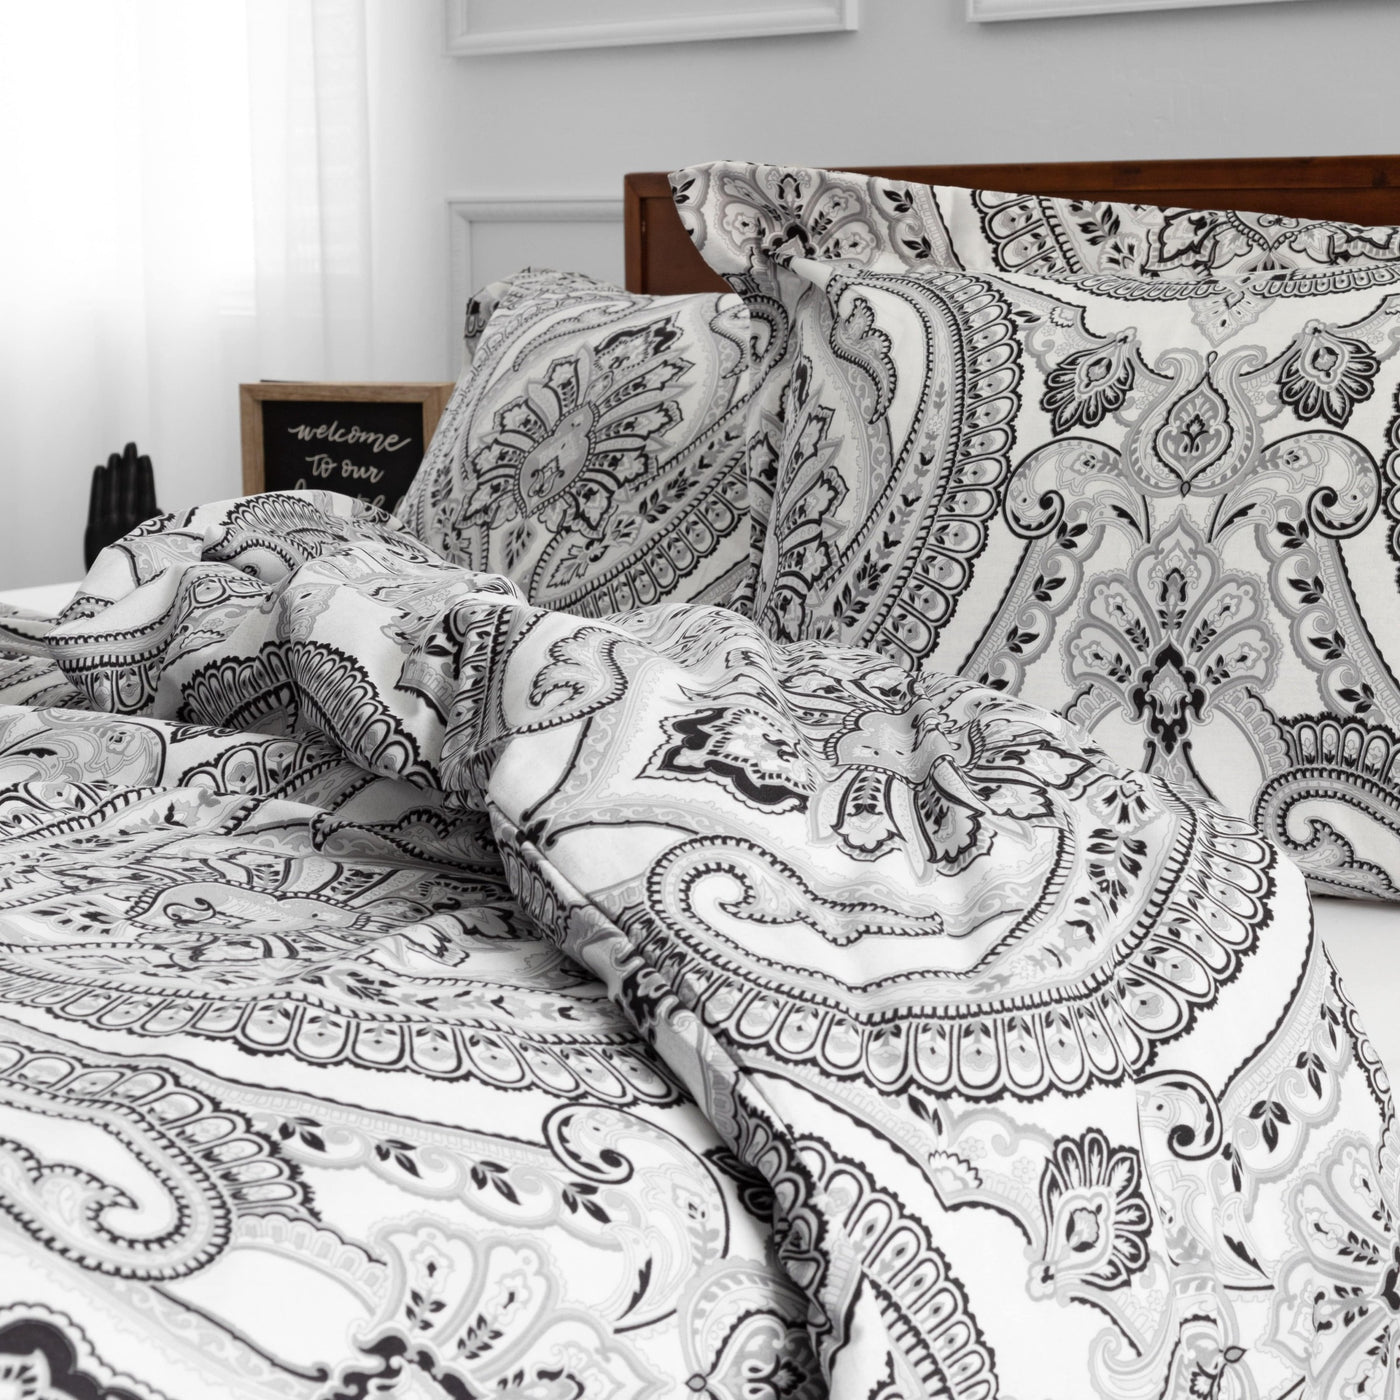 Pure Melody Comforter Set